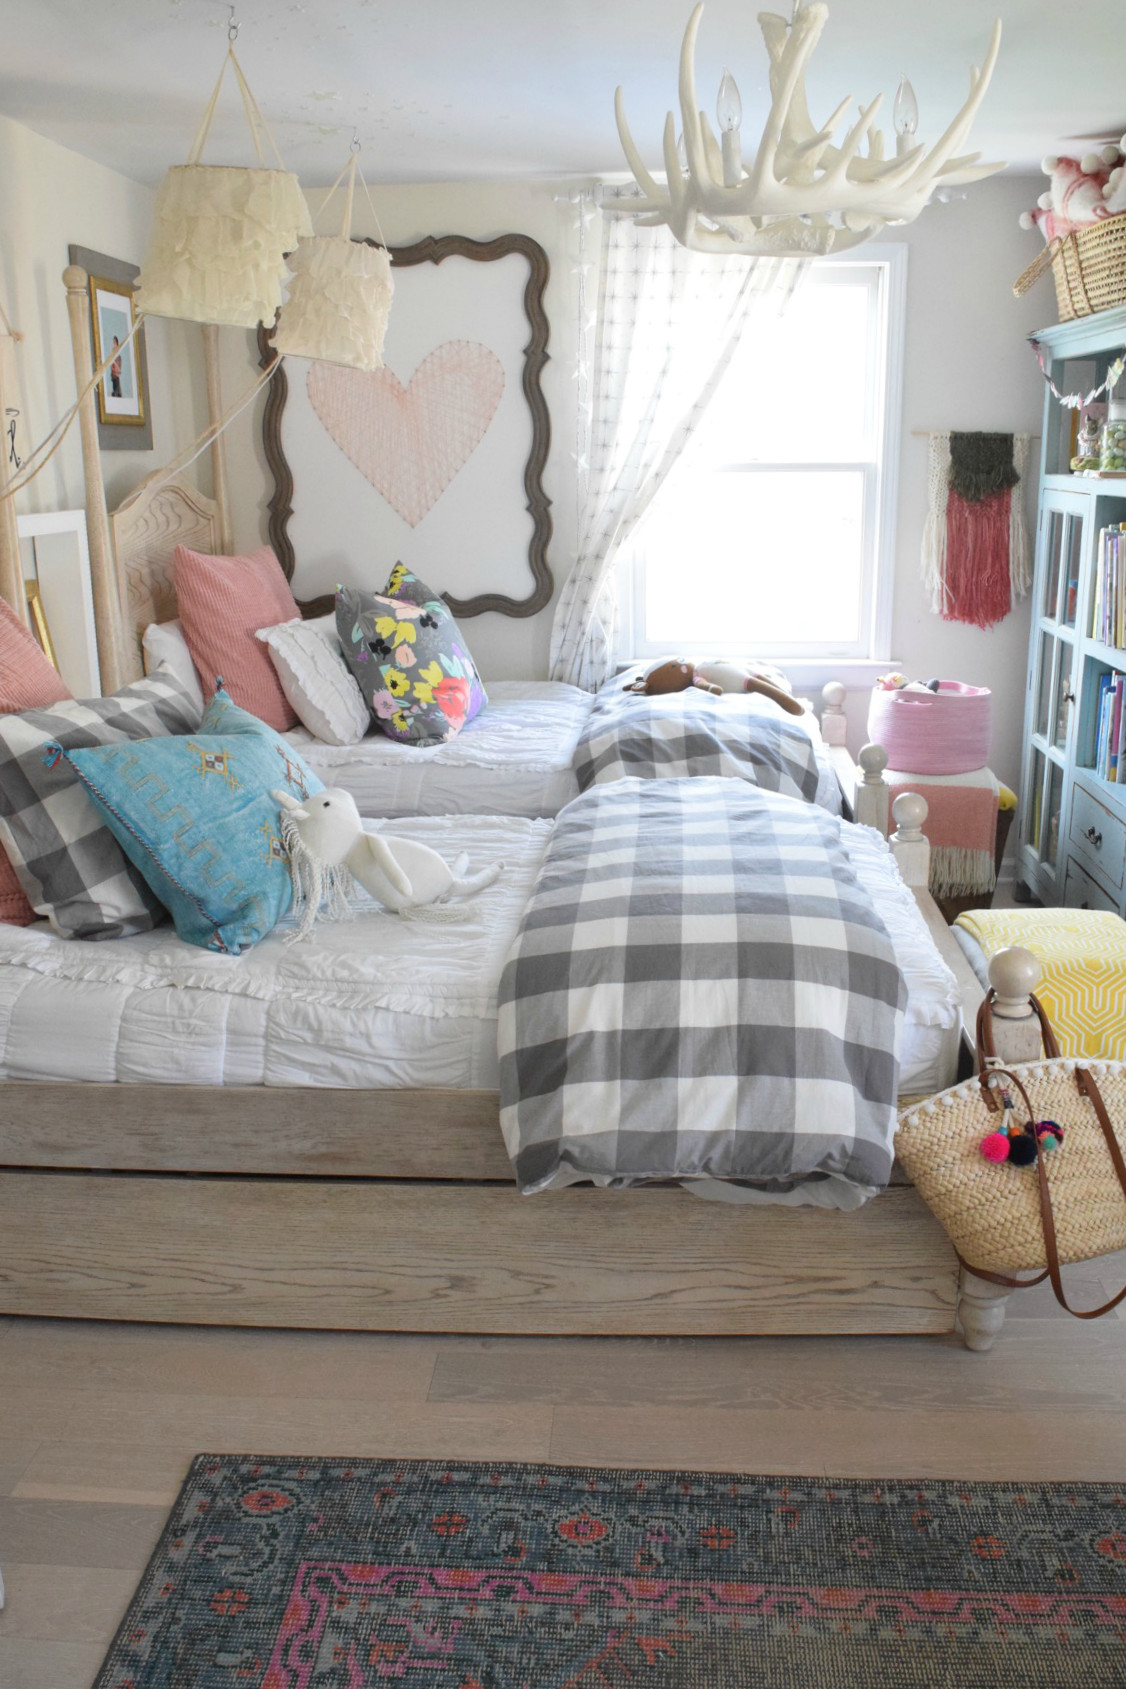 Bedroom For Girl
 Shop Our Home Nesting With Grace